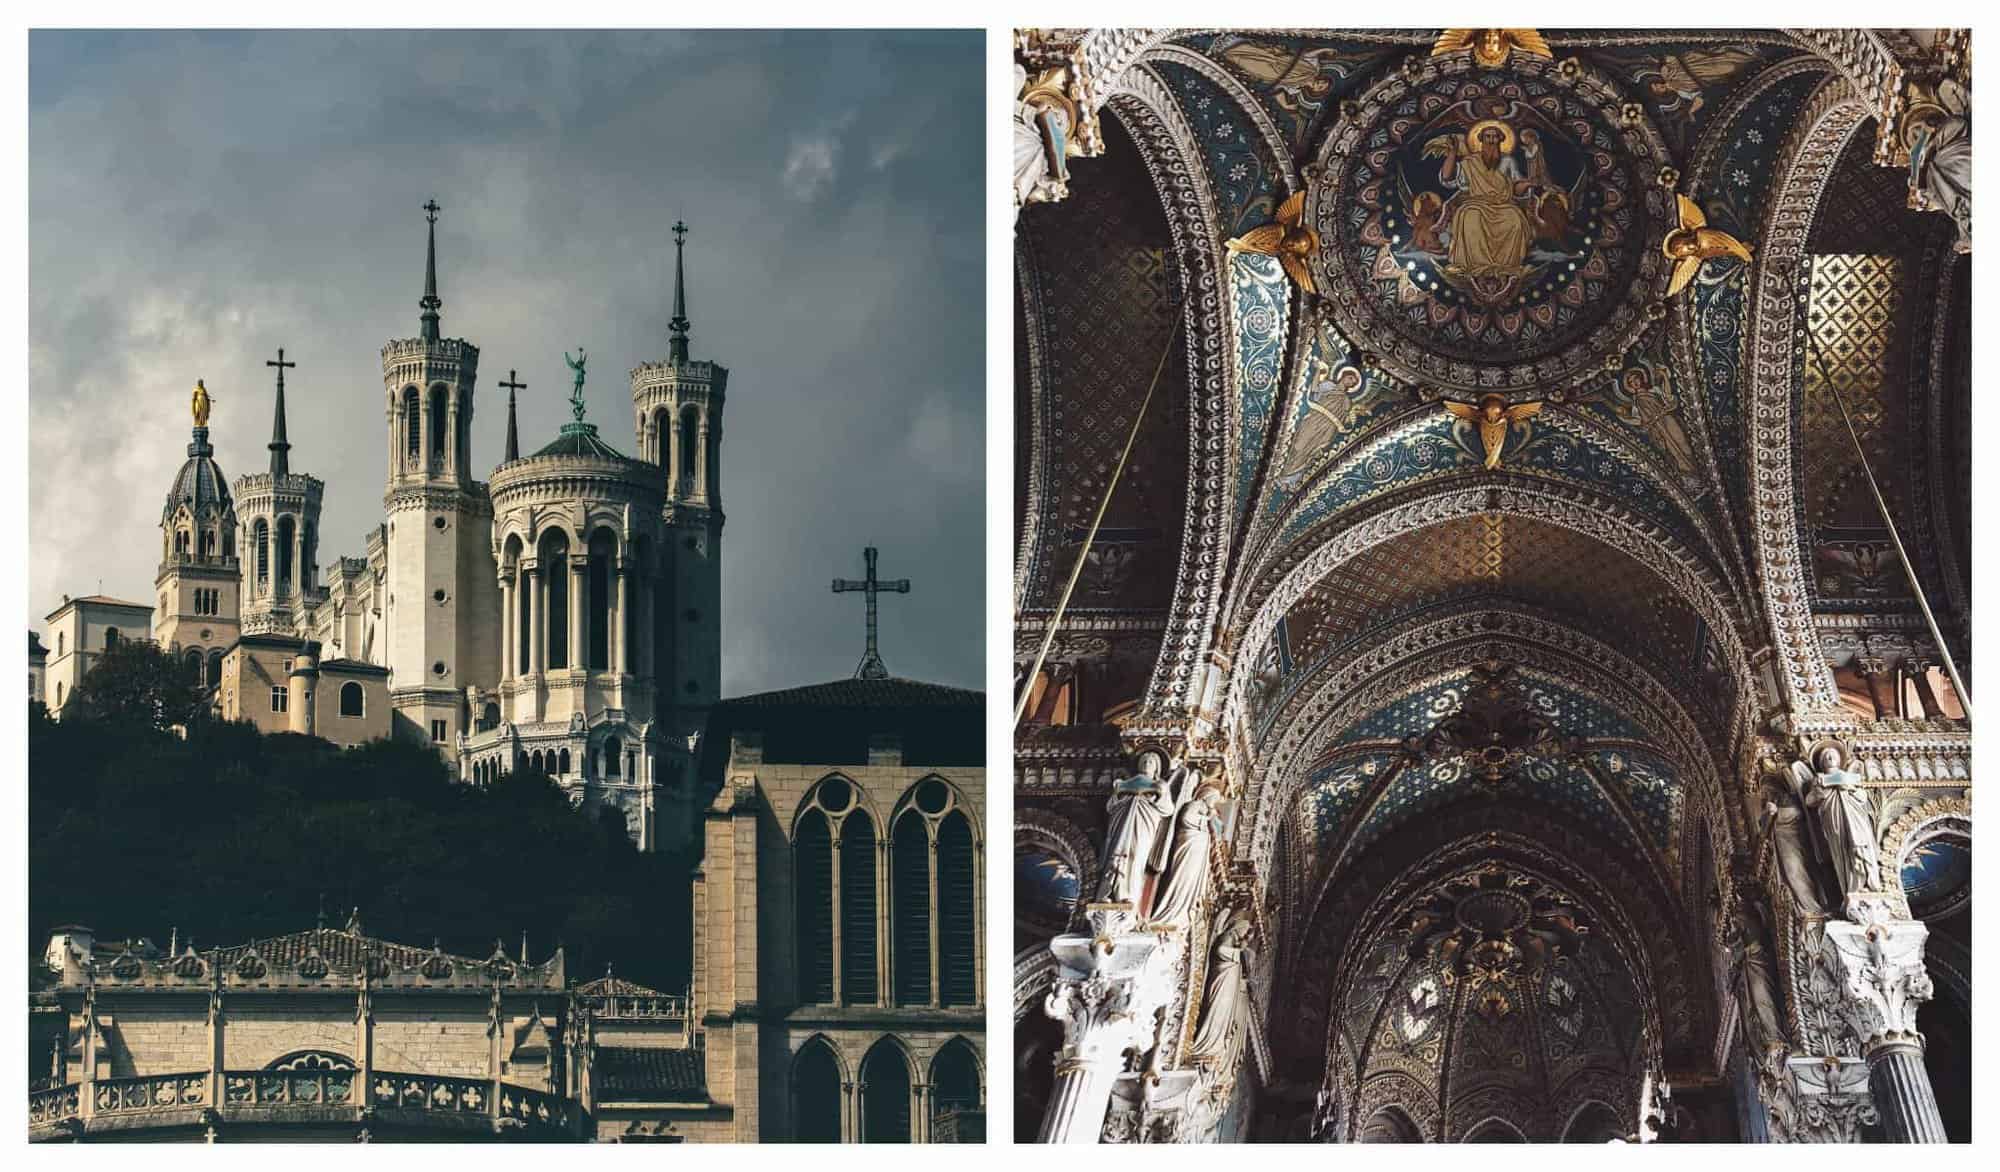 Left: A church with its towers and crosses. Right: A church's ceiling with paintings and murals.